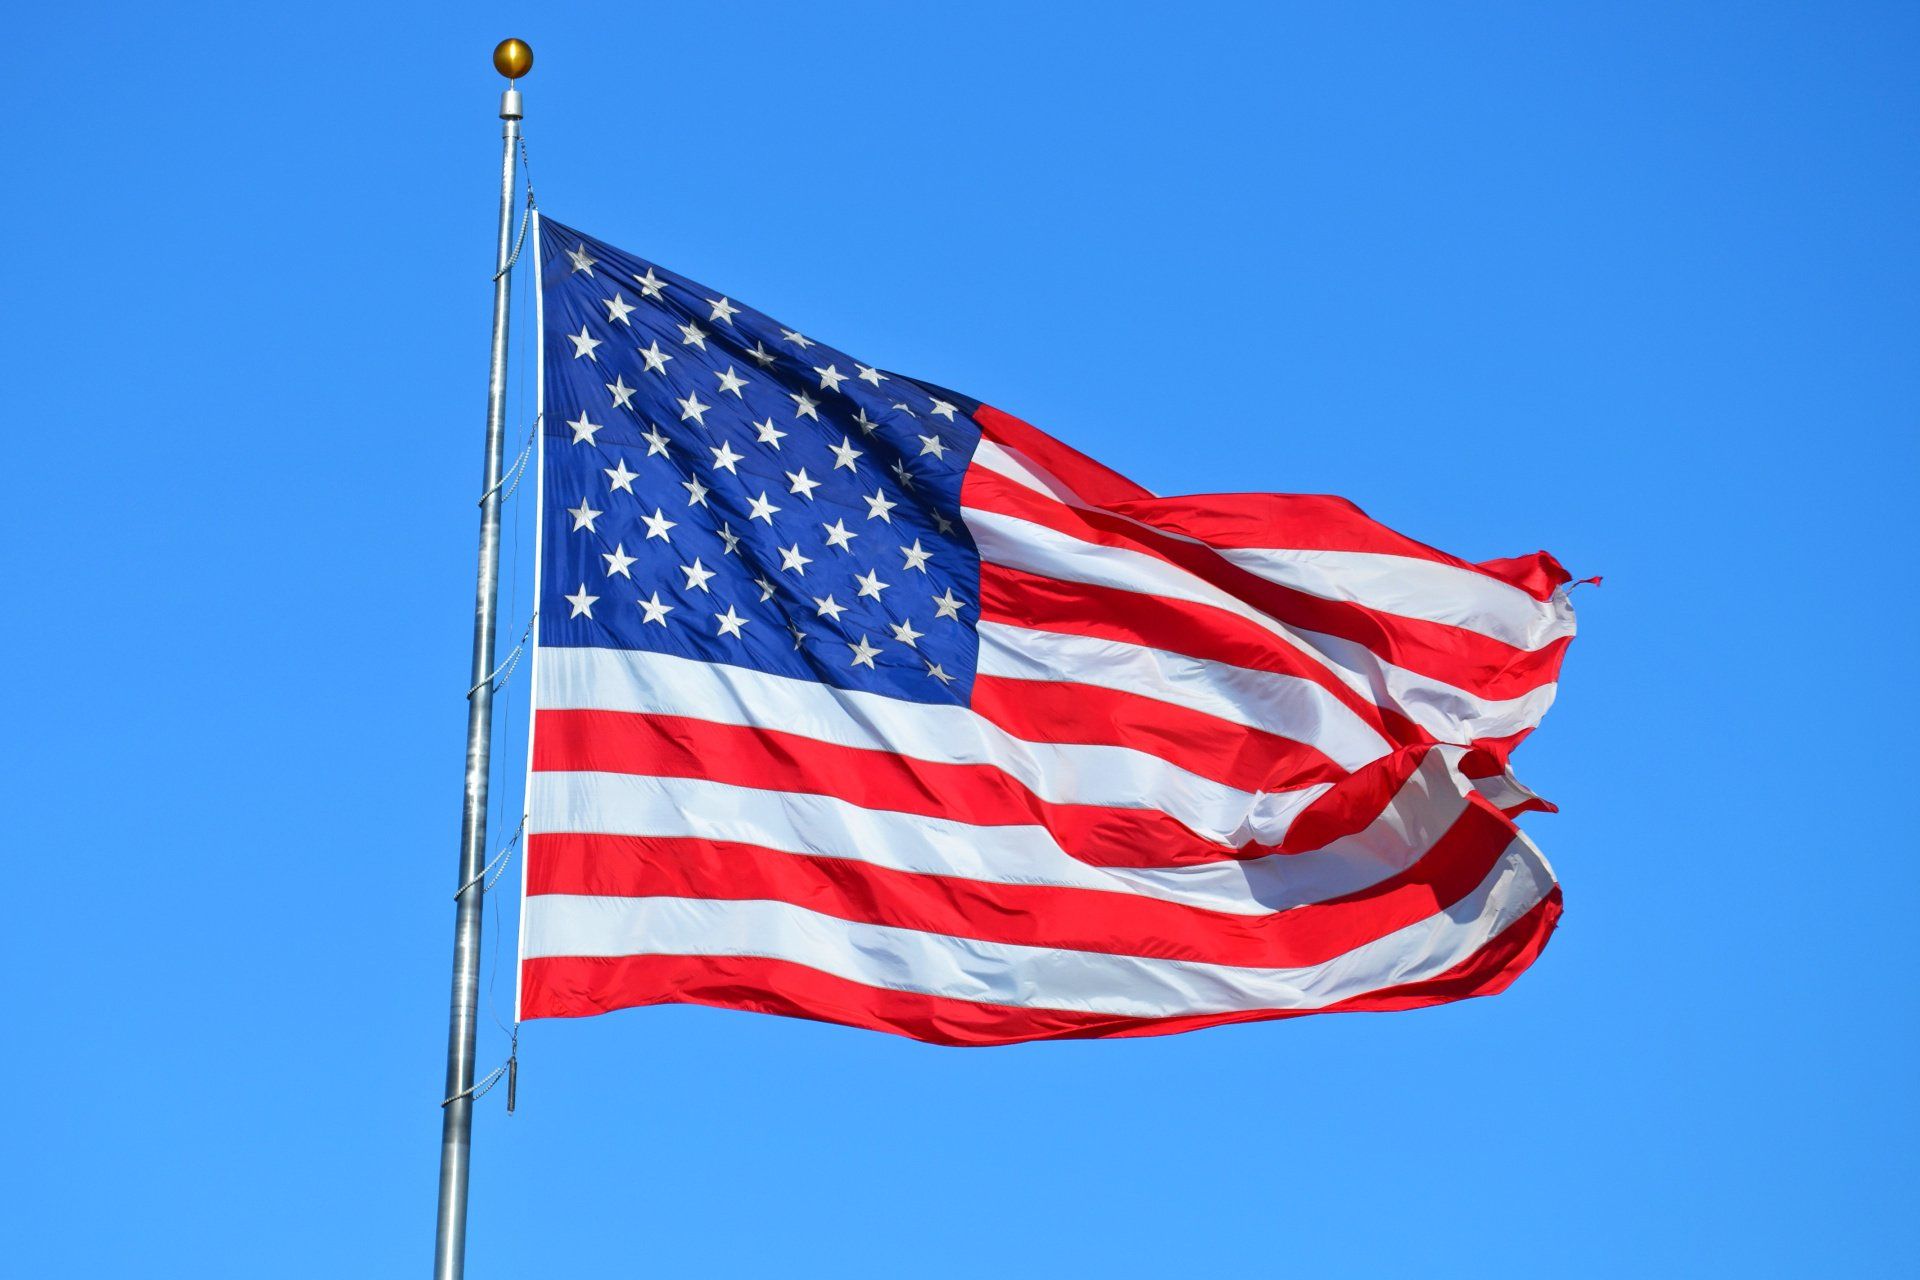 The american flag is waving in the wind against a blue sky.